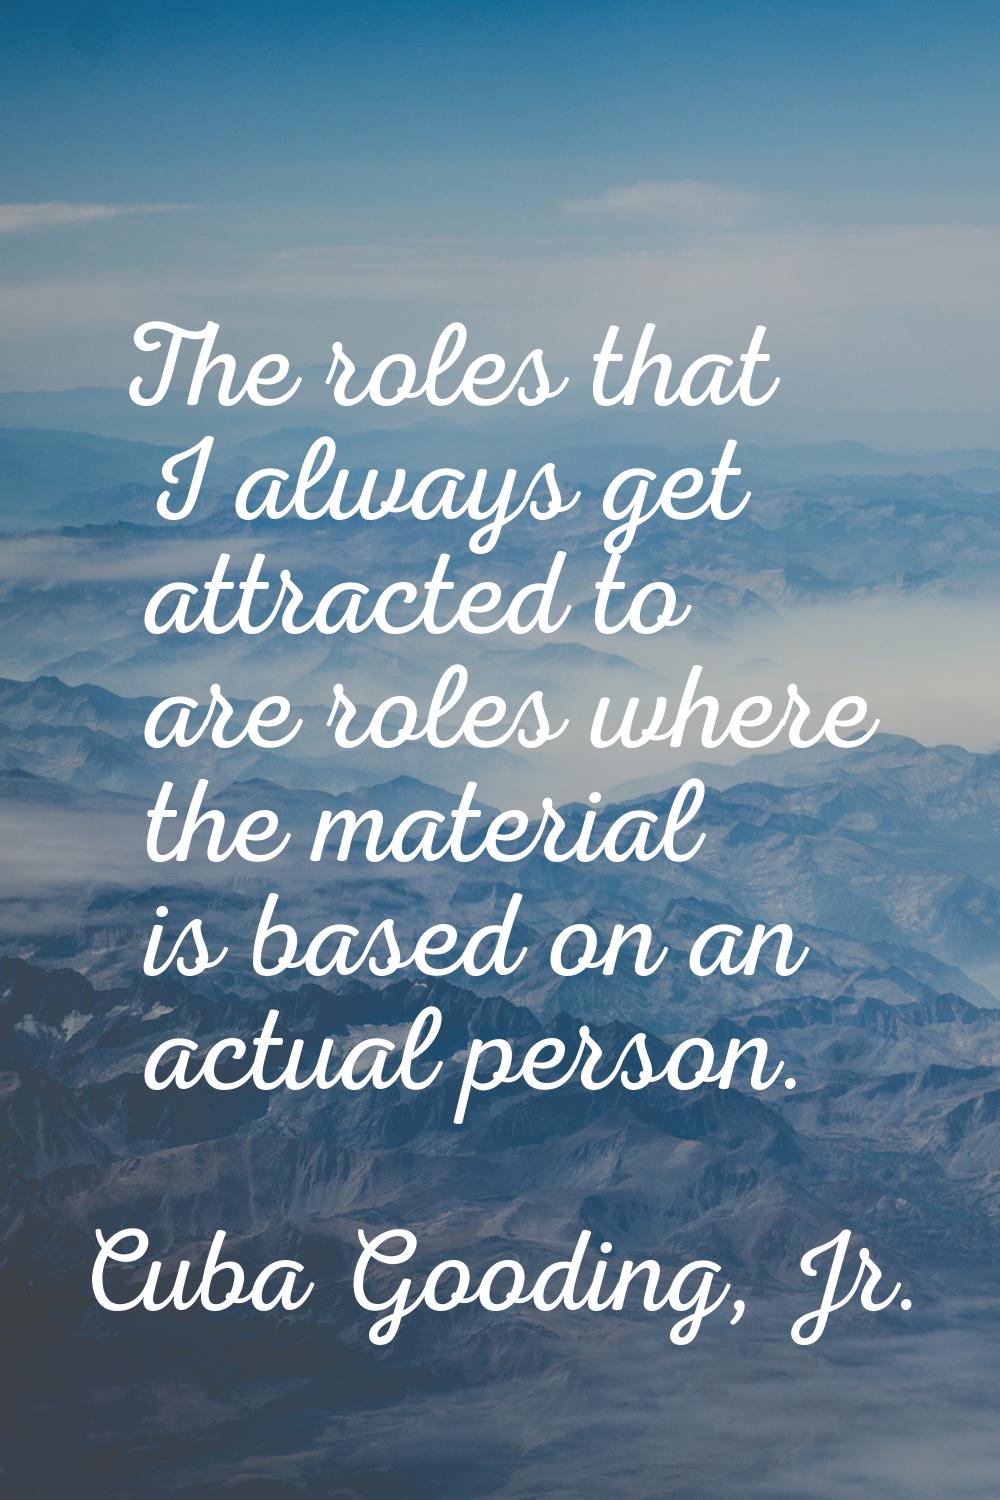 The roles that I always get attracted to are roles where the material is based on an actual person.